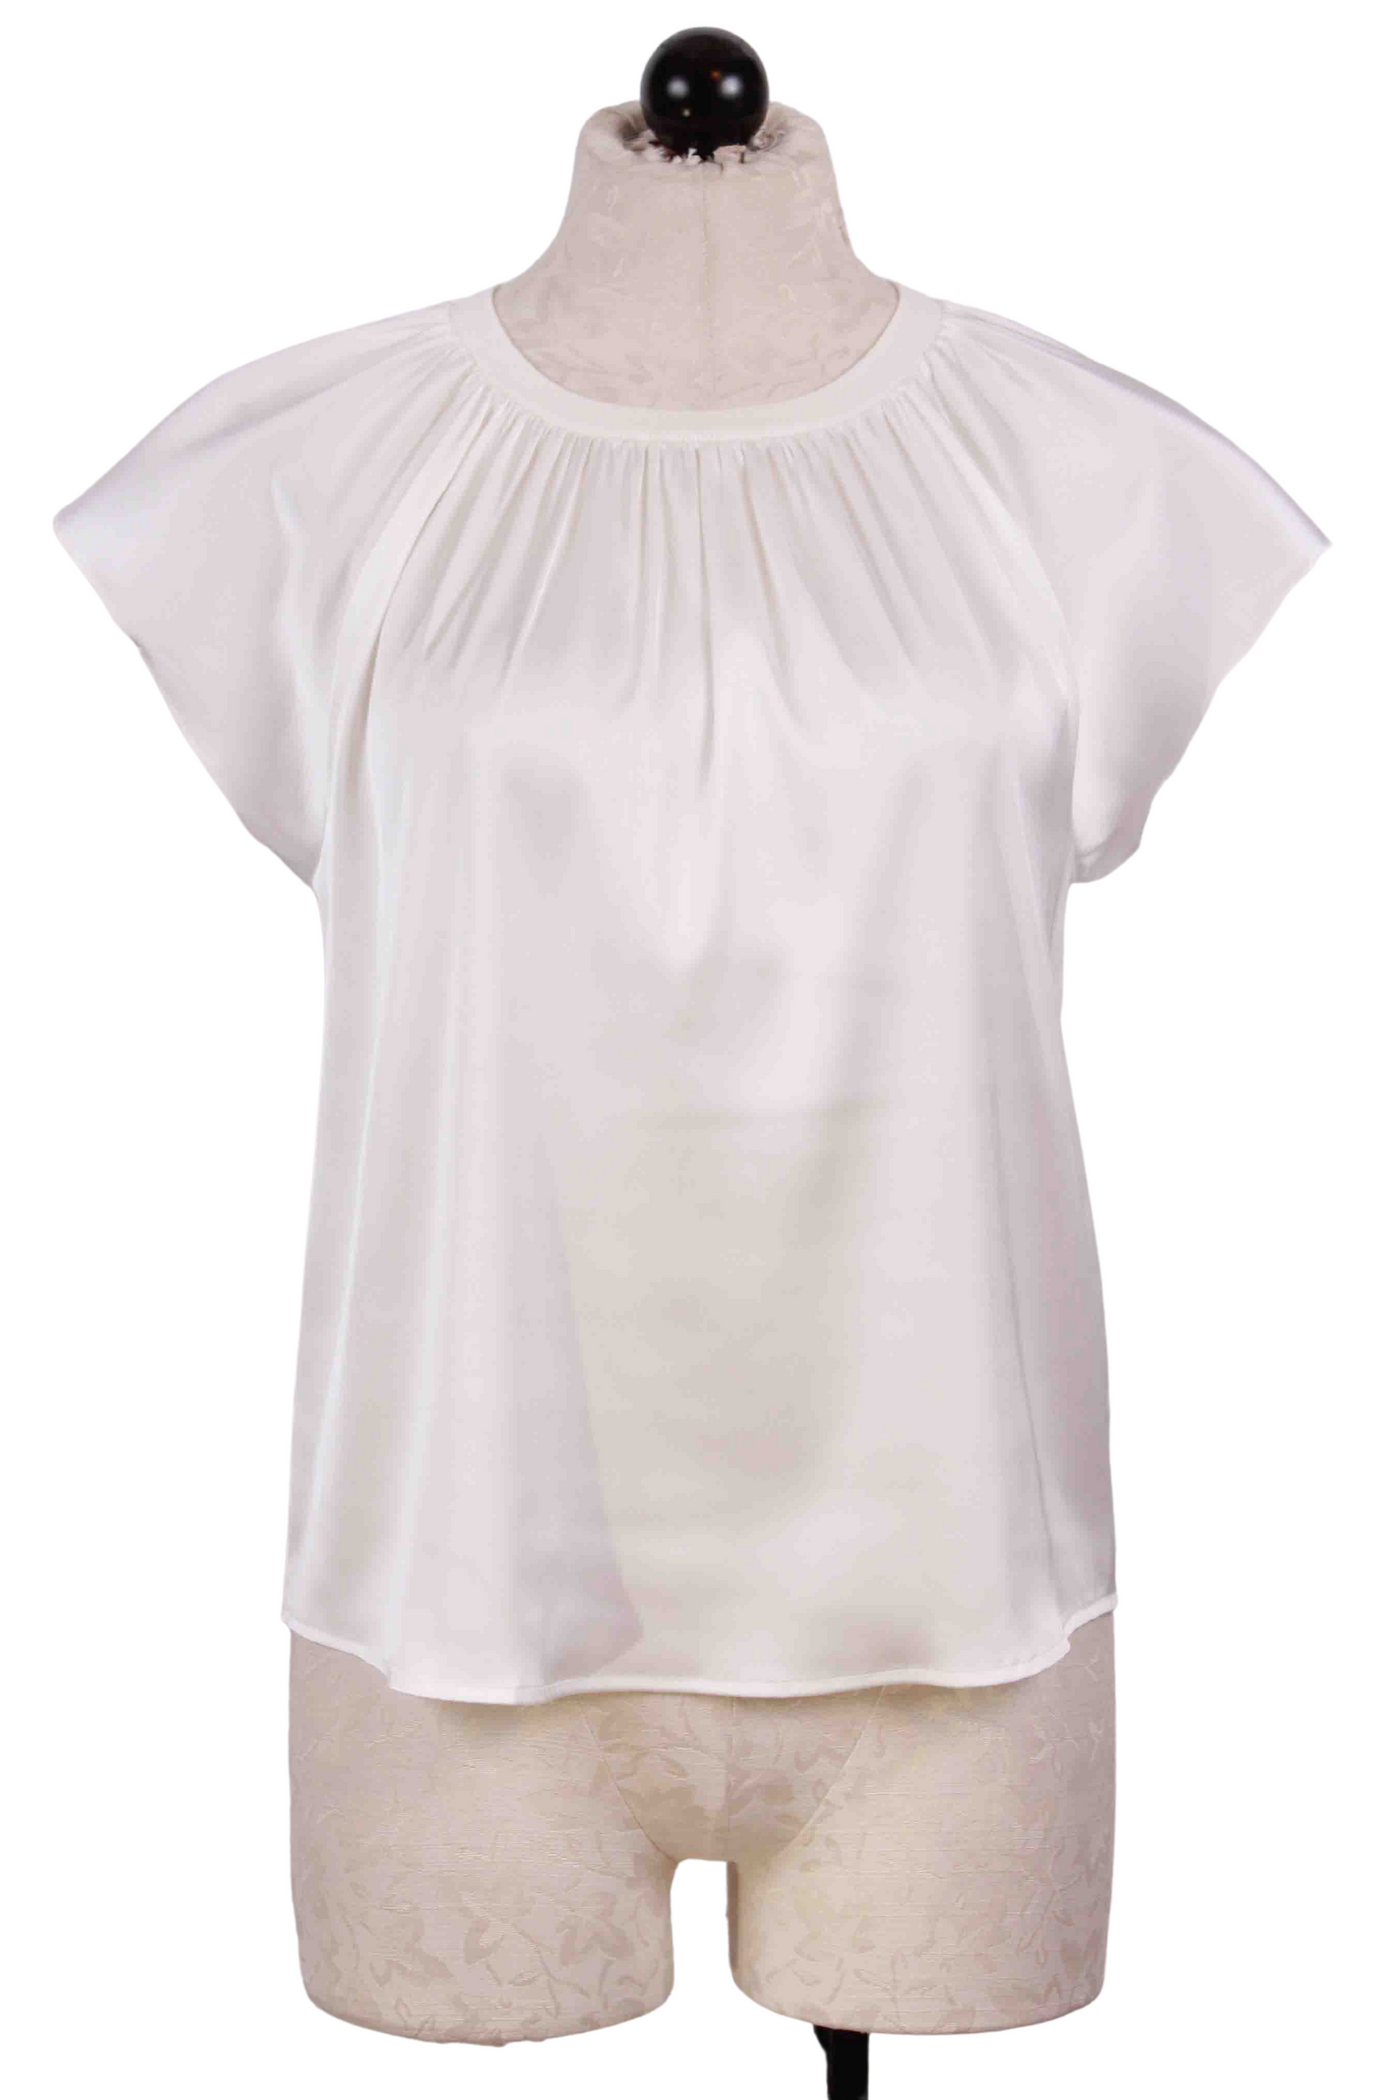 White Pernilla Blouse by Generation Love with a pretty shirred neck and flutter sleeves